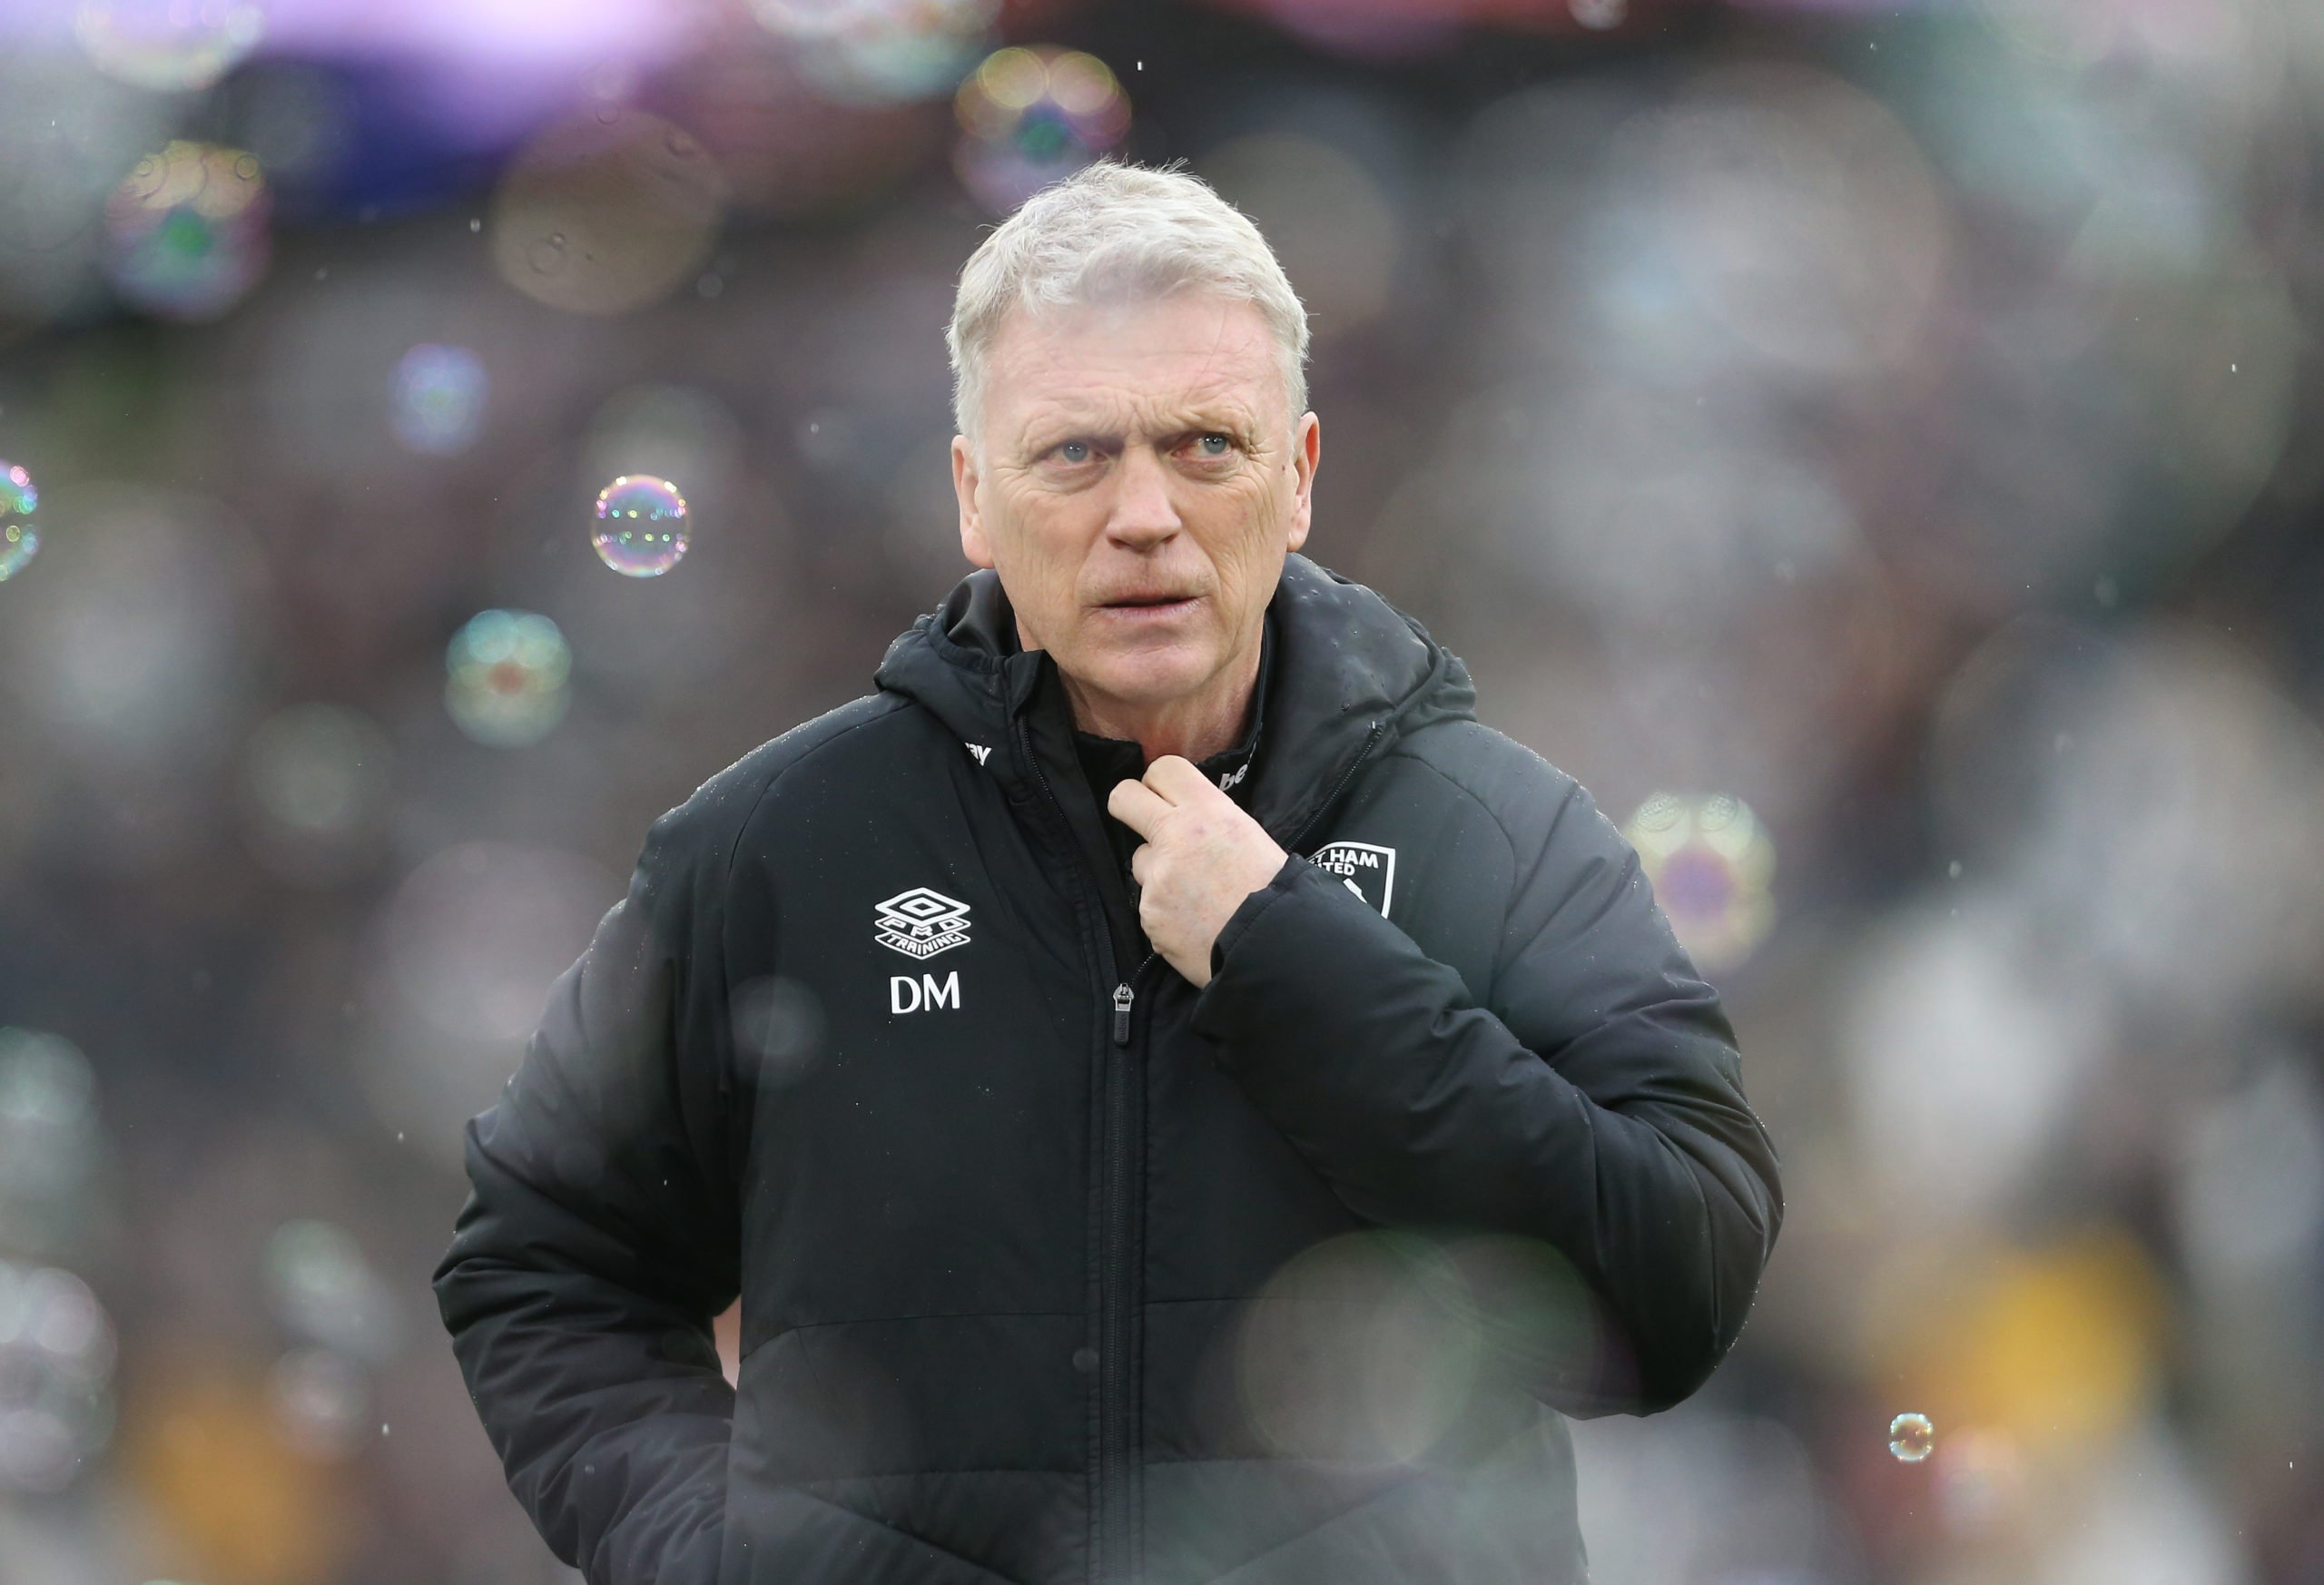 David Moyes shares huge injury update on key West Ham ace ahead of Liverpool after FA Cup loss